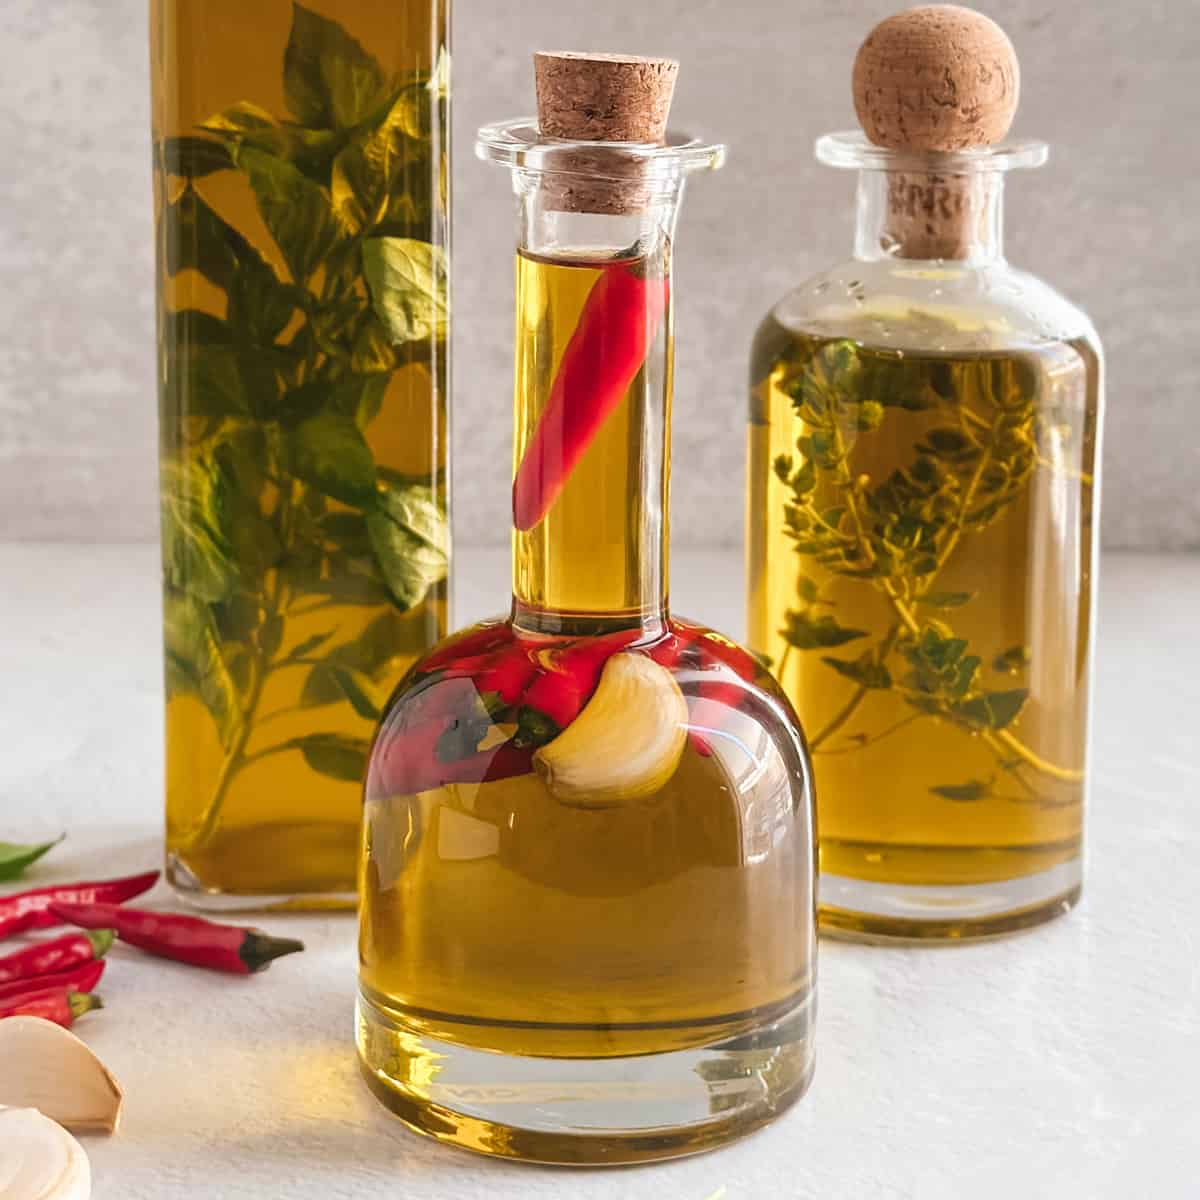 Three glass bottles filled with olive oil, various herbs and garlic cloves on a white table.